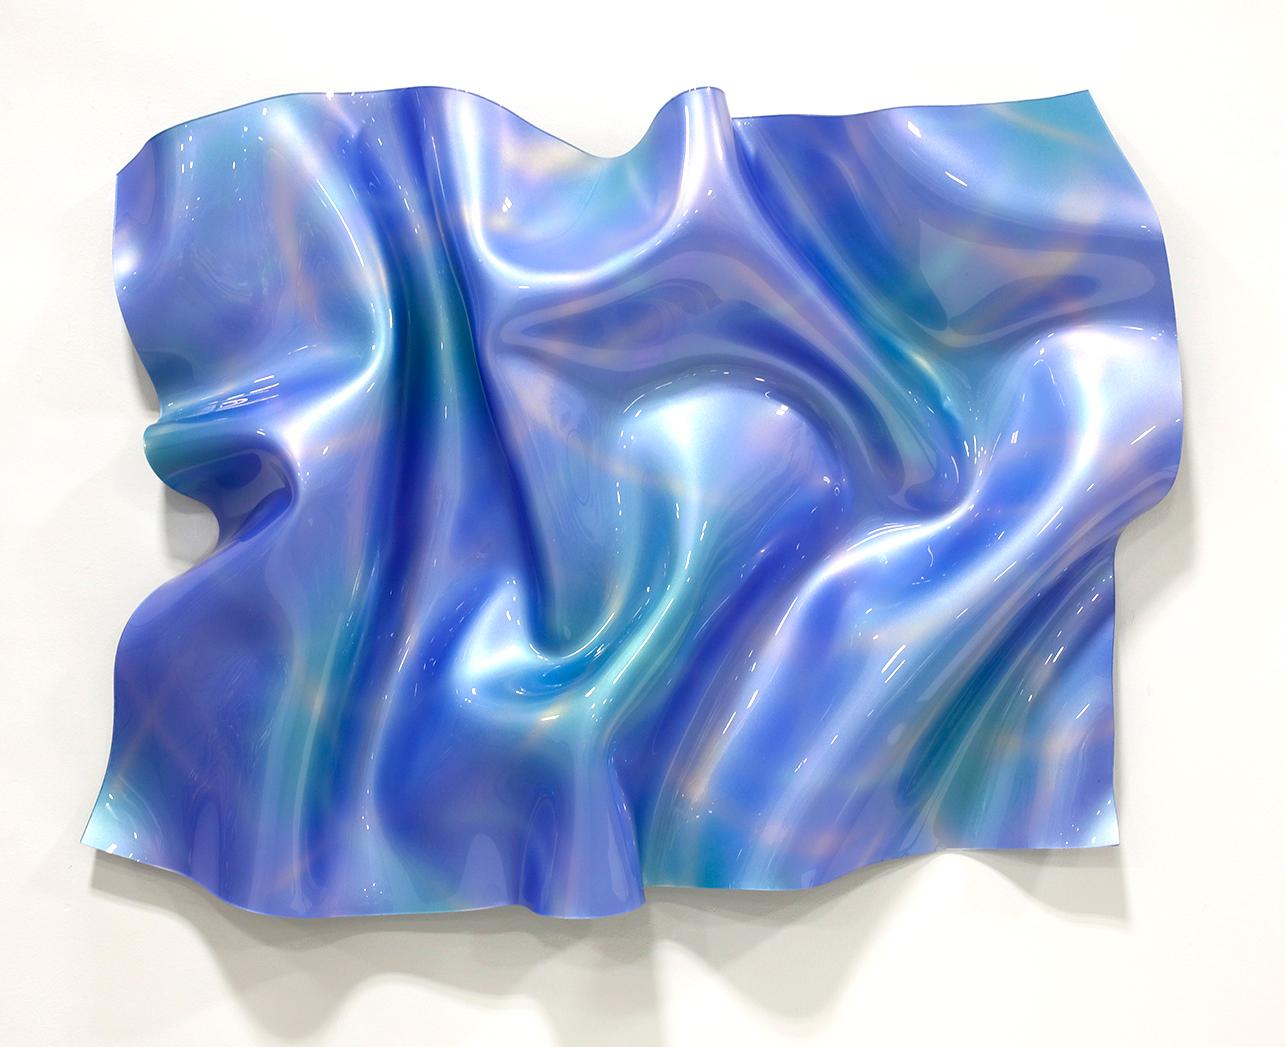 Beautiful Blue Hand Sculpted Surface of Water / Wave / Iridescent Pop Art  - Mixed Media Art by Paul Rousso